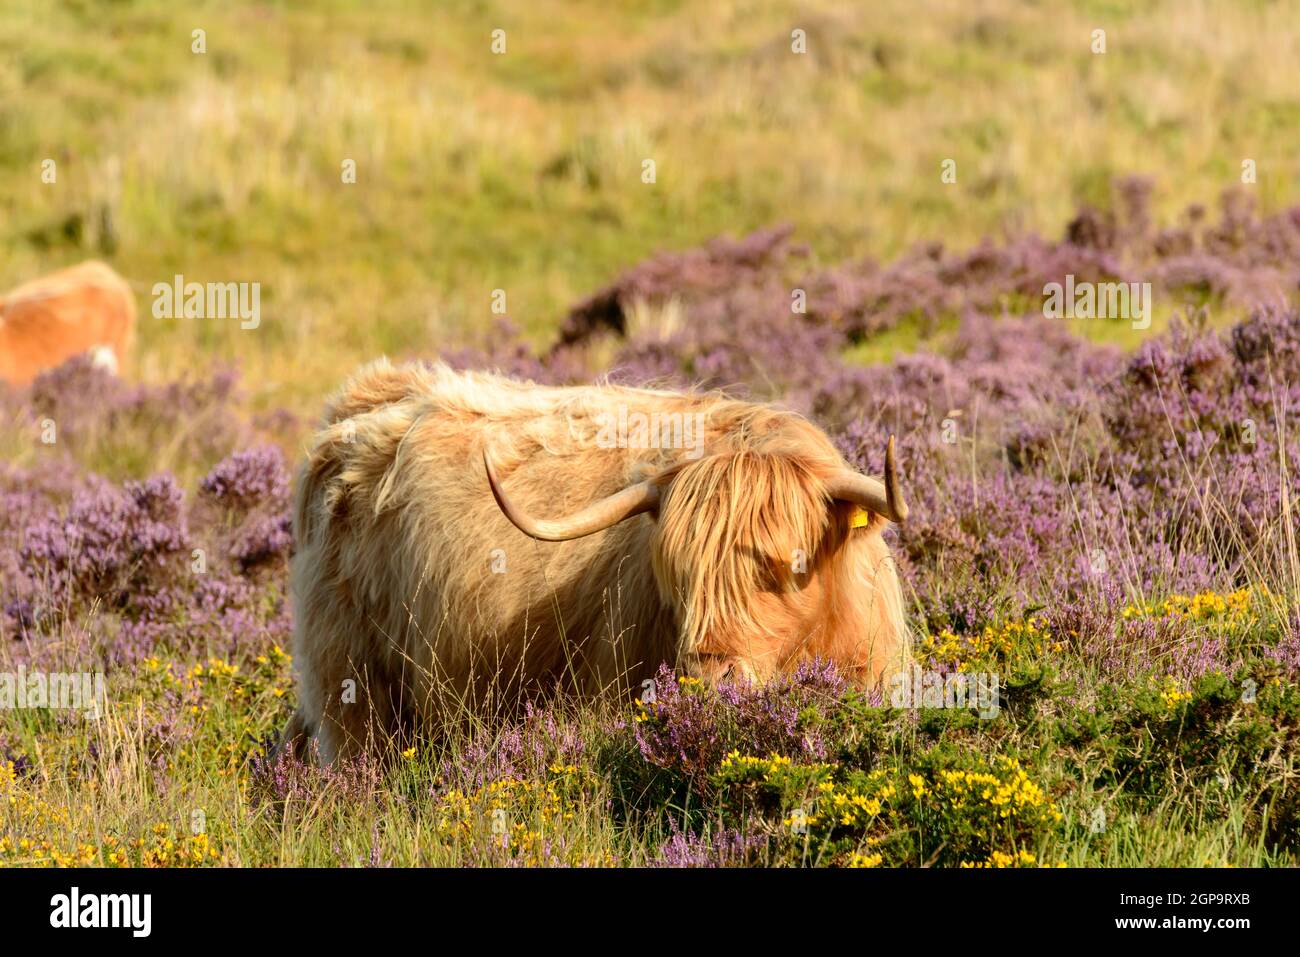 muzzle of hairy cattle grazing among heather bush in the moor Stock Photo